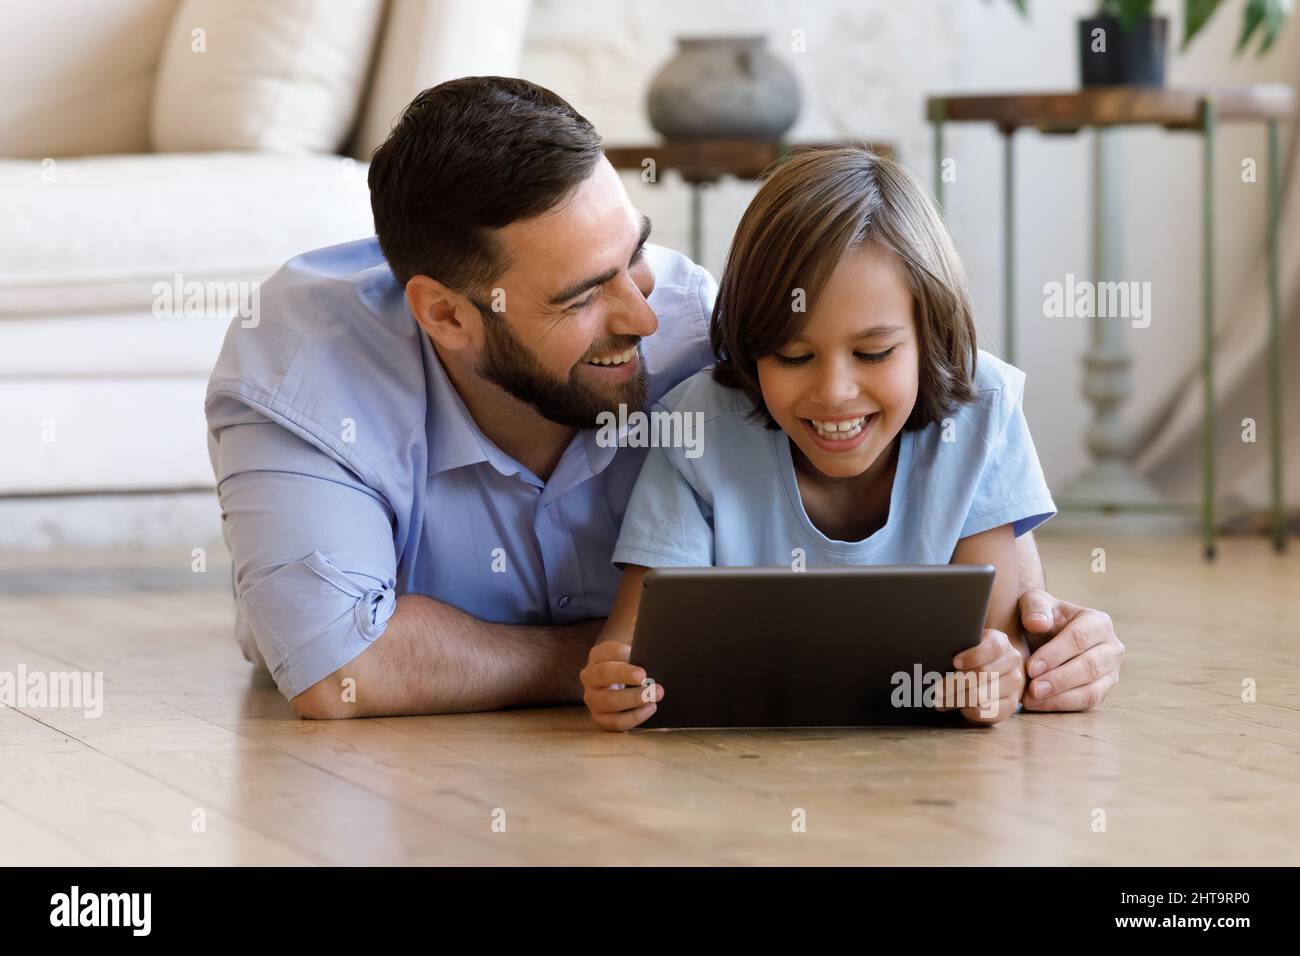 Dad and son lying on floor using digital tablet Stock Photo